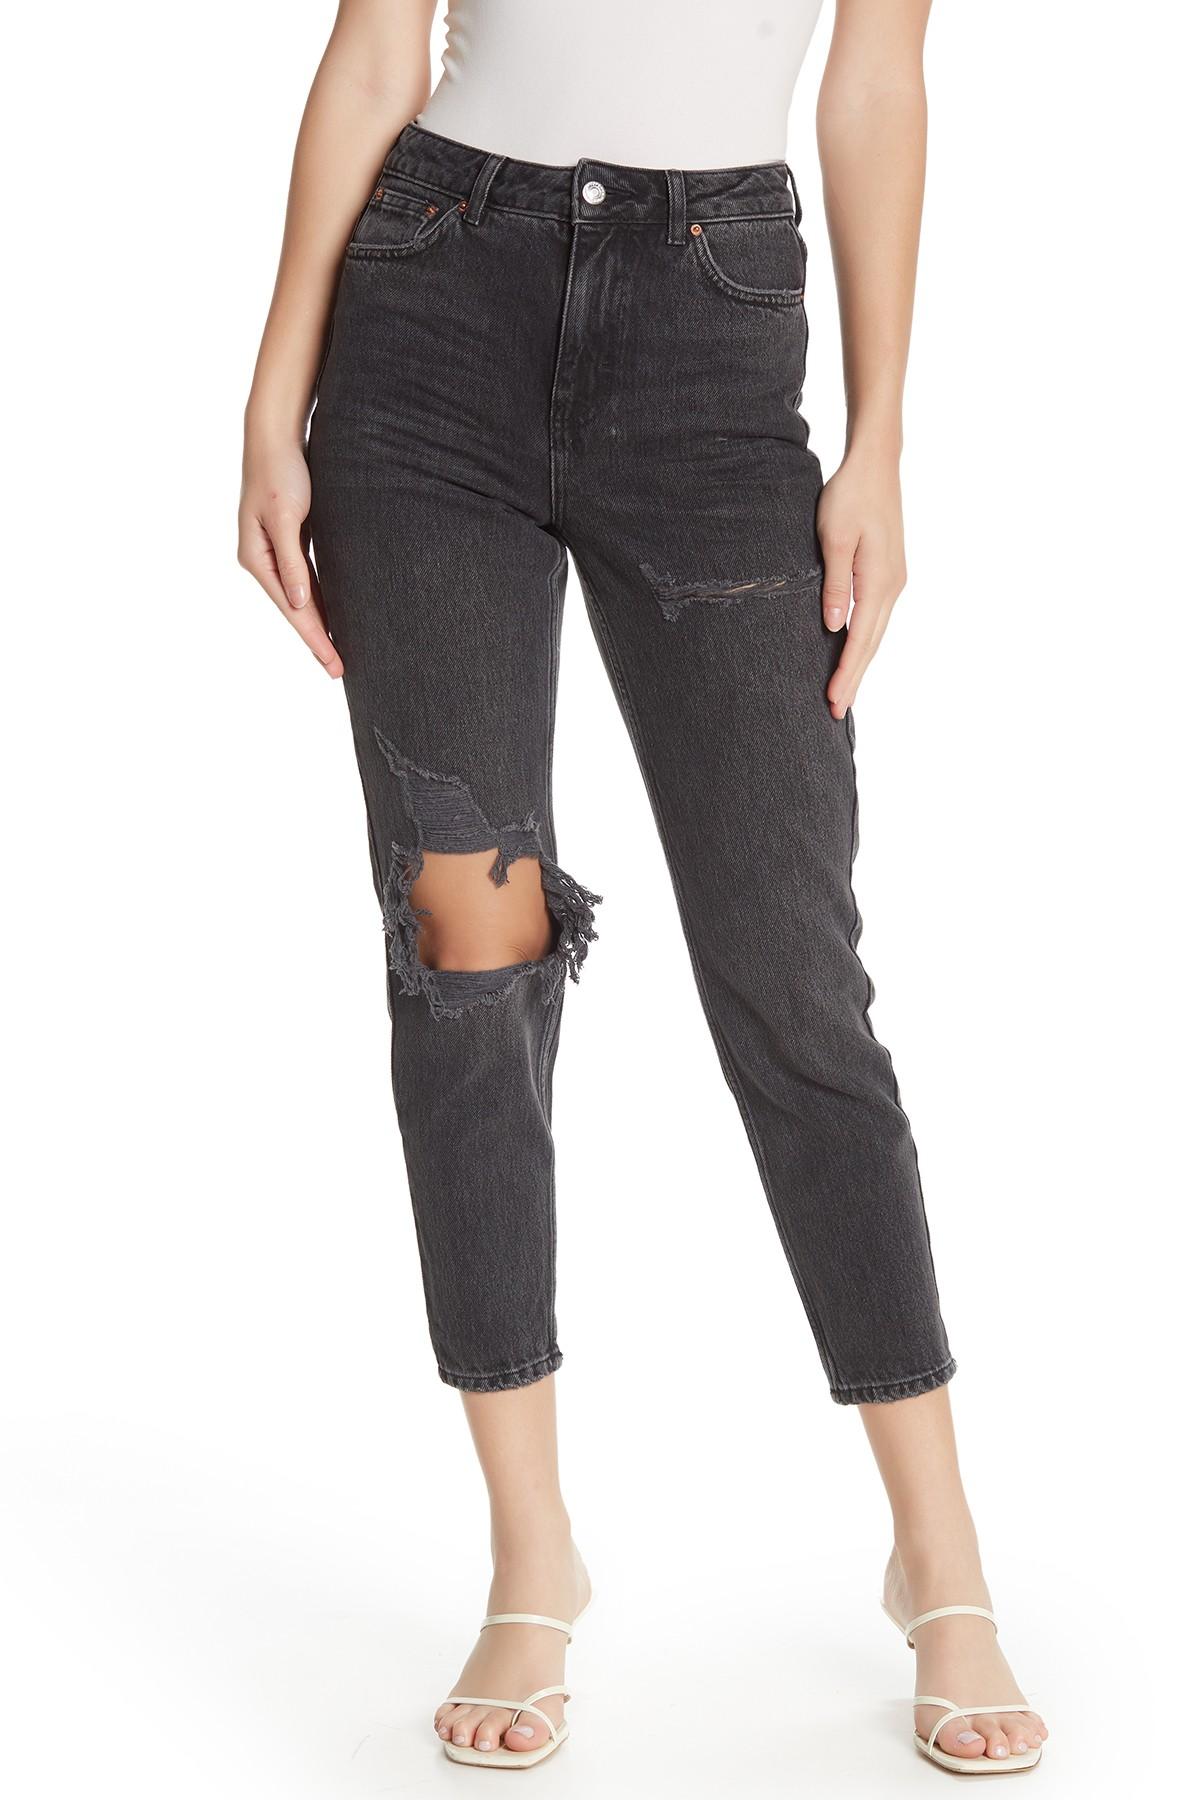 topshop willow jeans